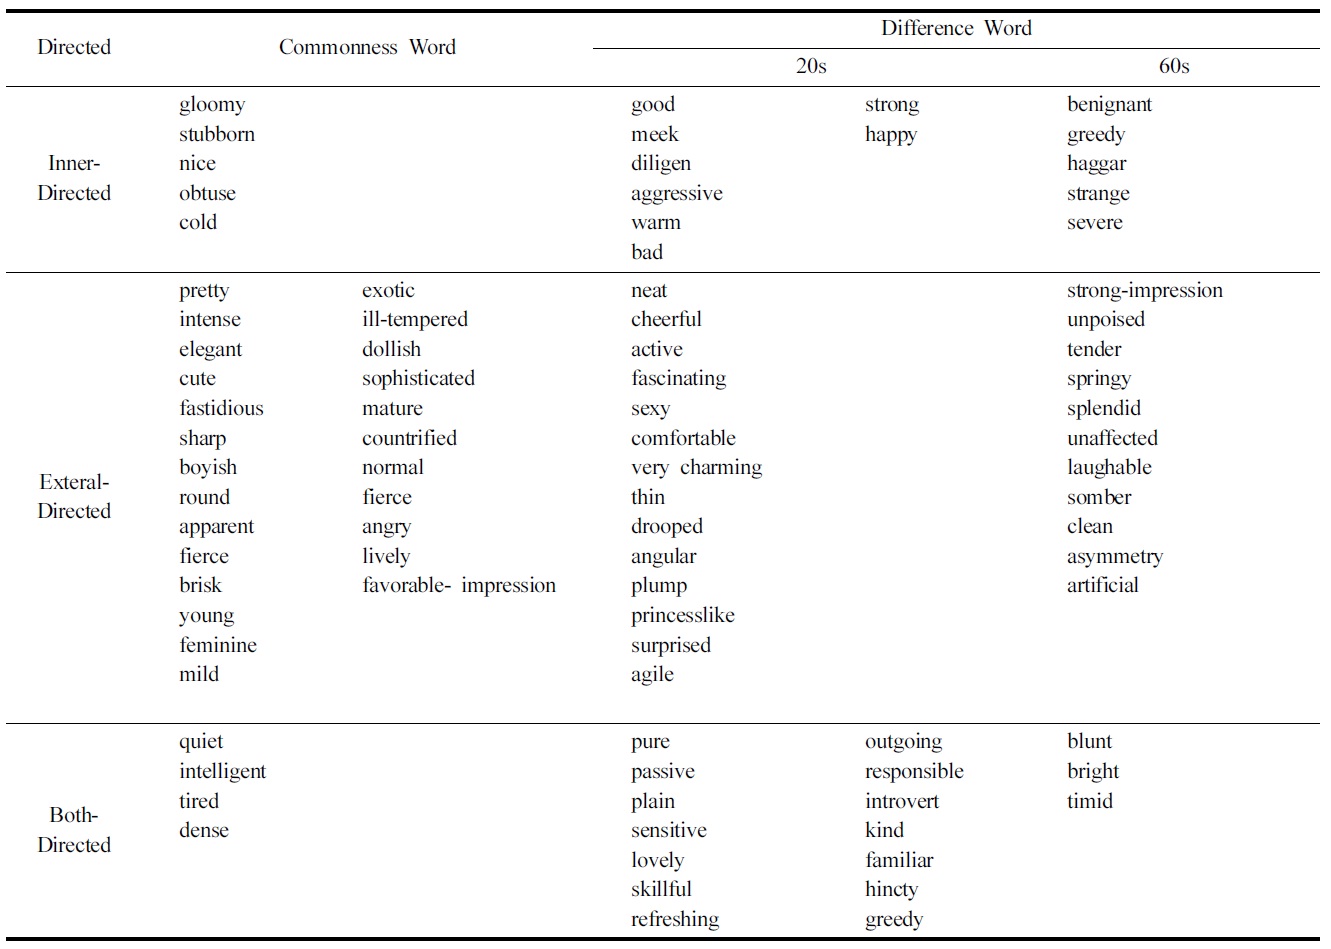 Comparative Propensity of Image Words in Women Faces in 20s and 60s